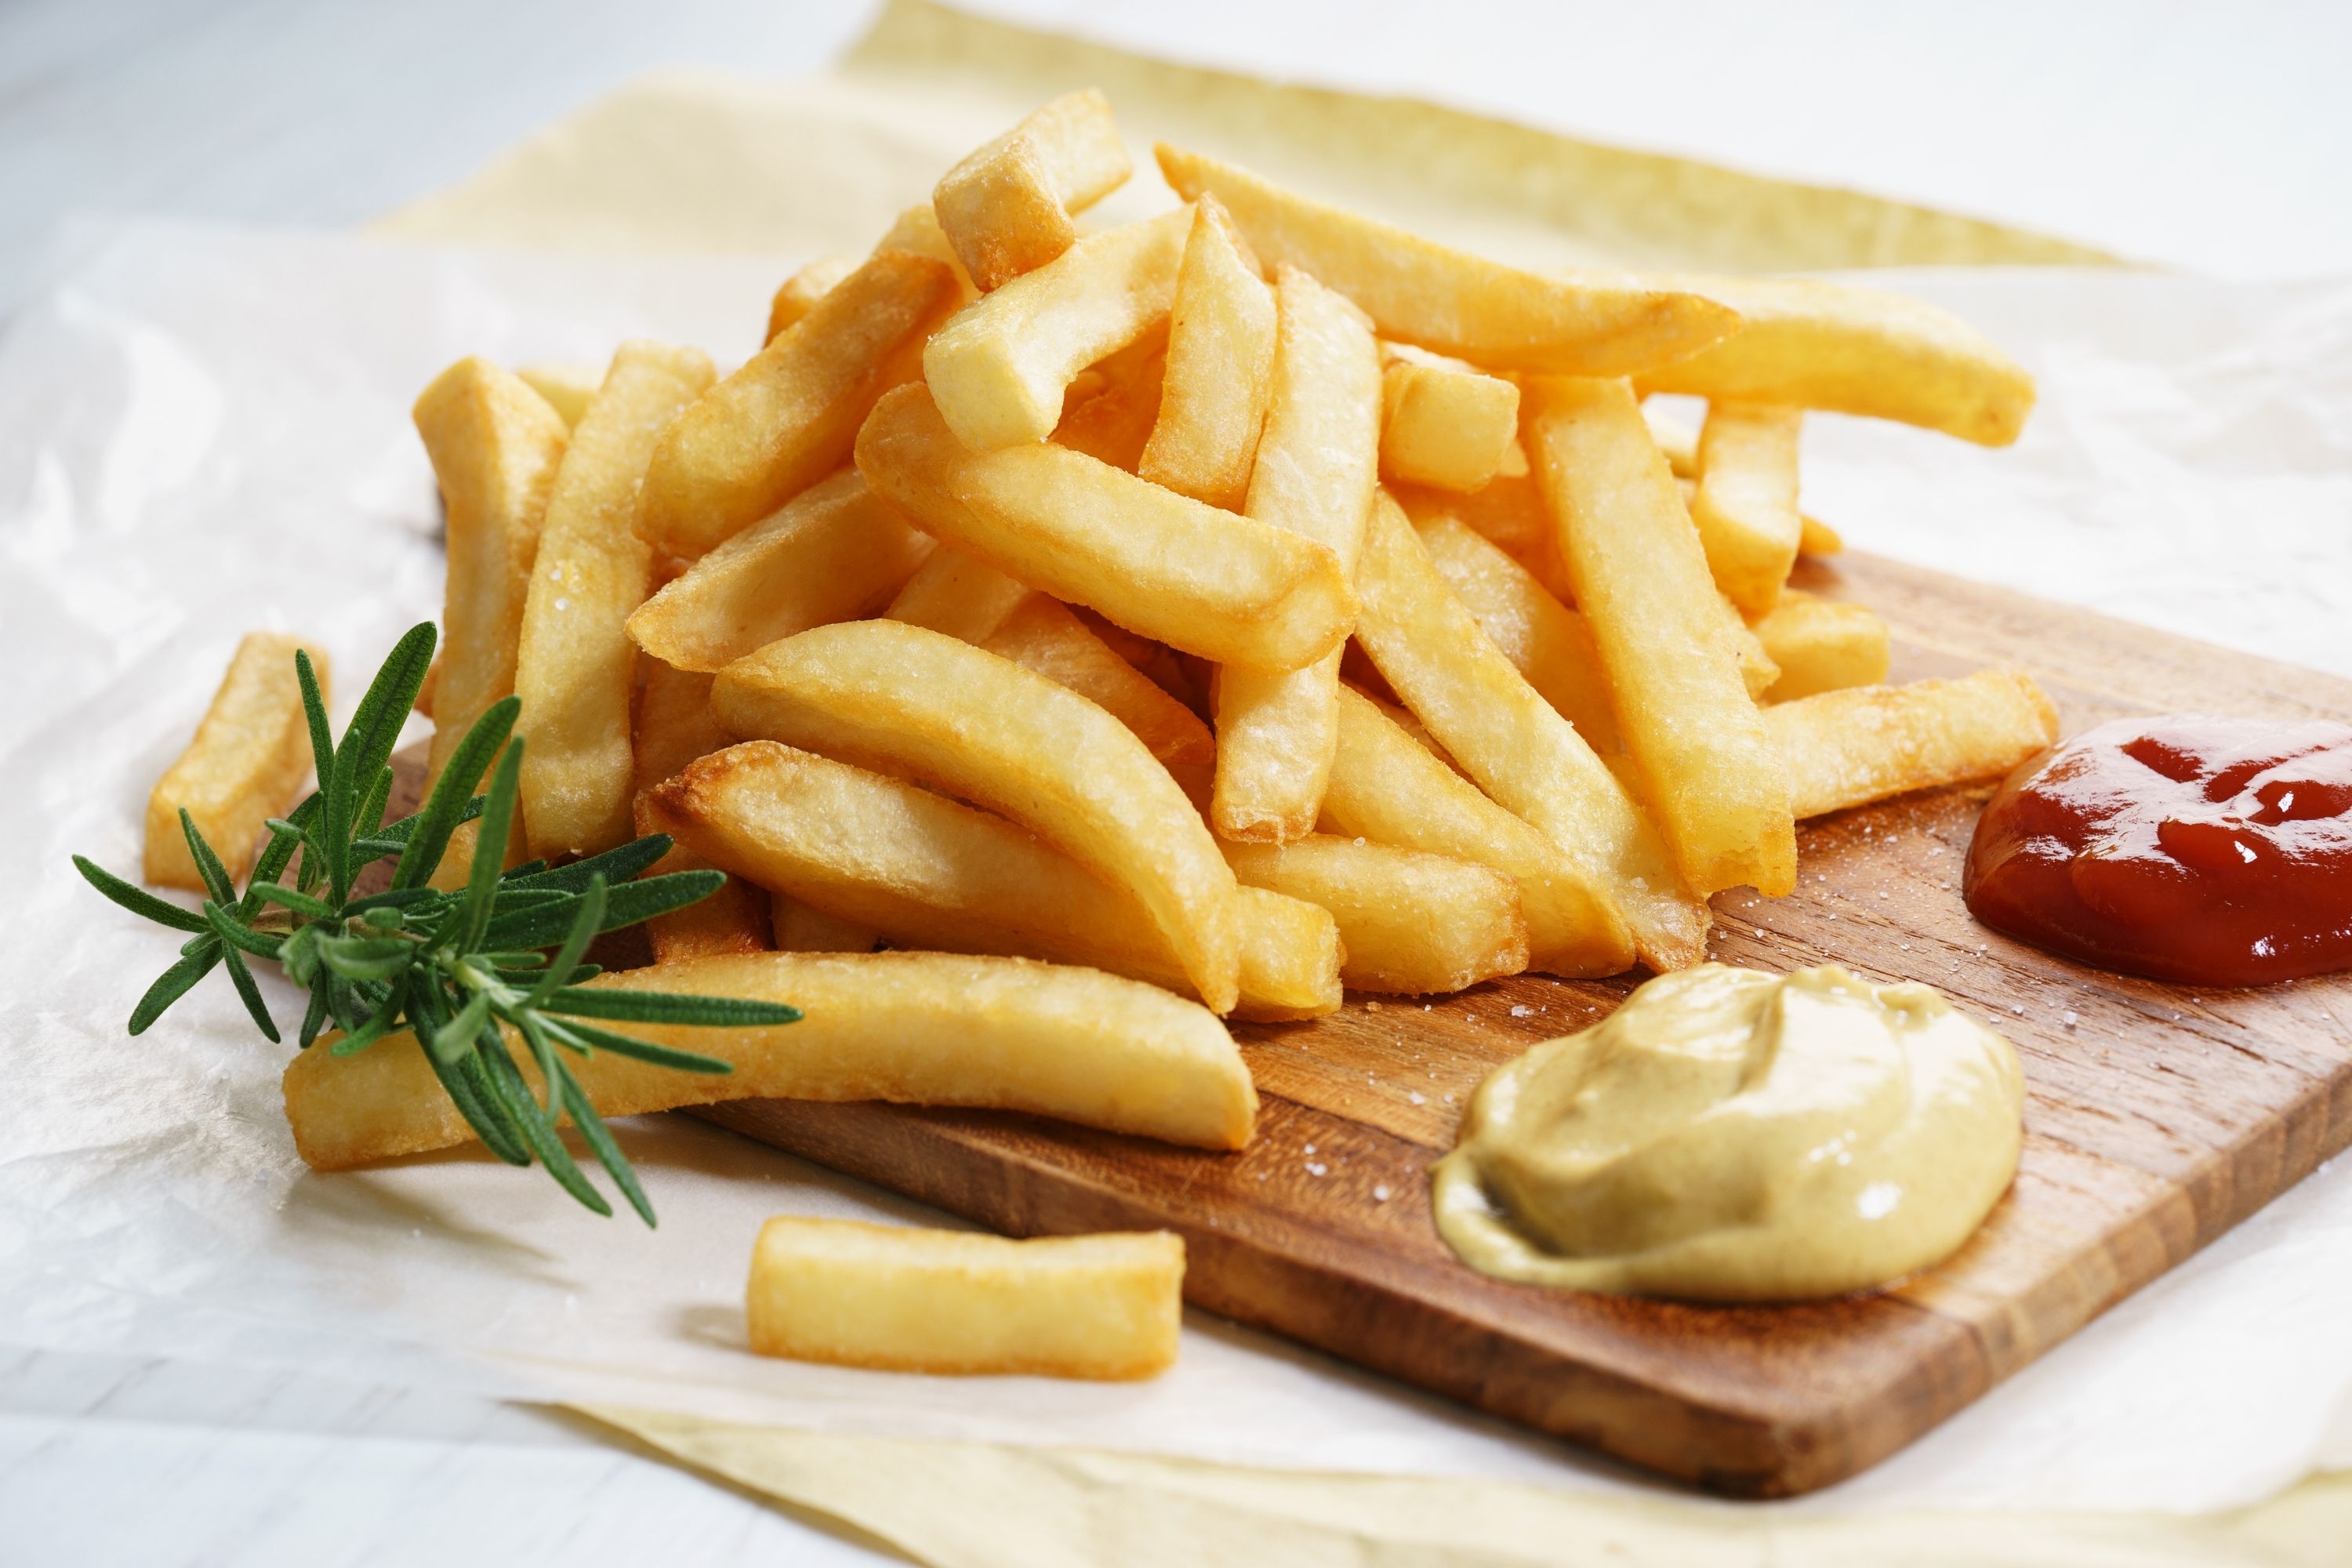 How to Season French Fries